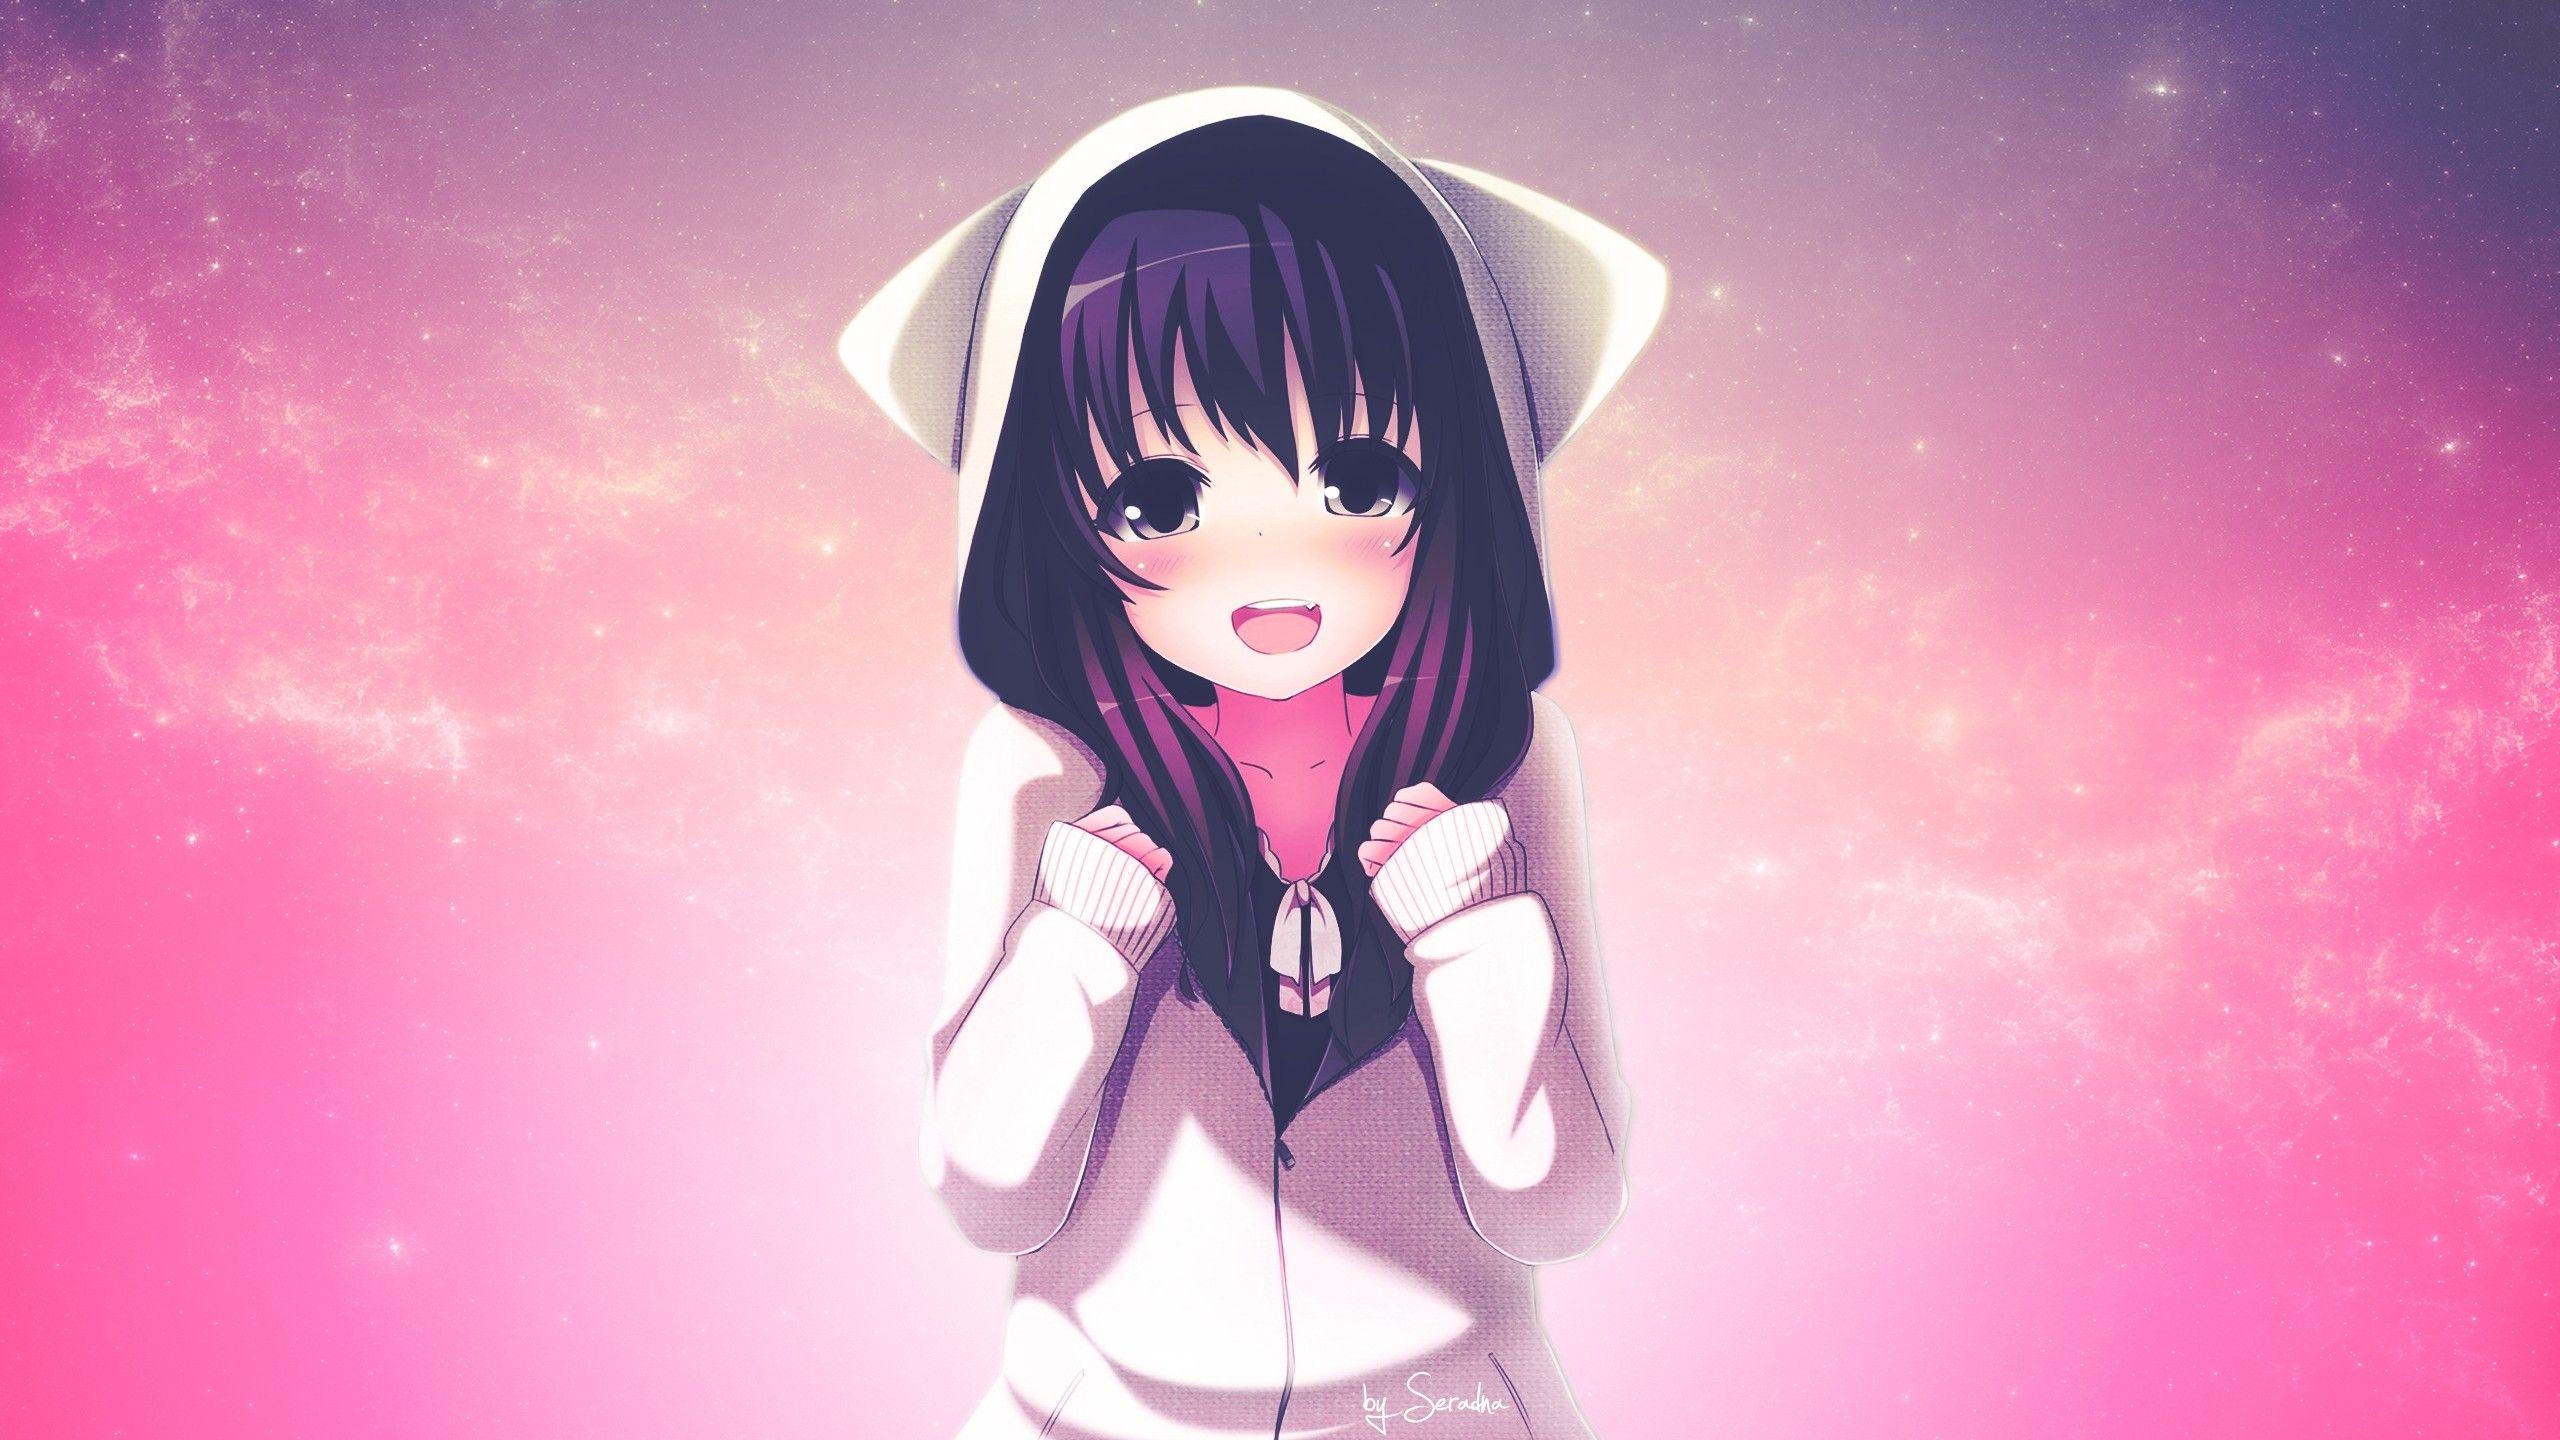 Cute Anime wallpaperDownload free awesome full HD background